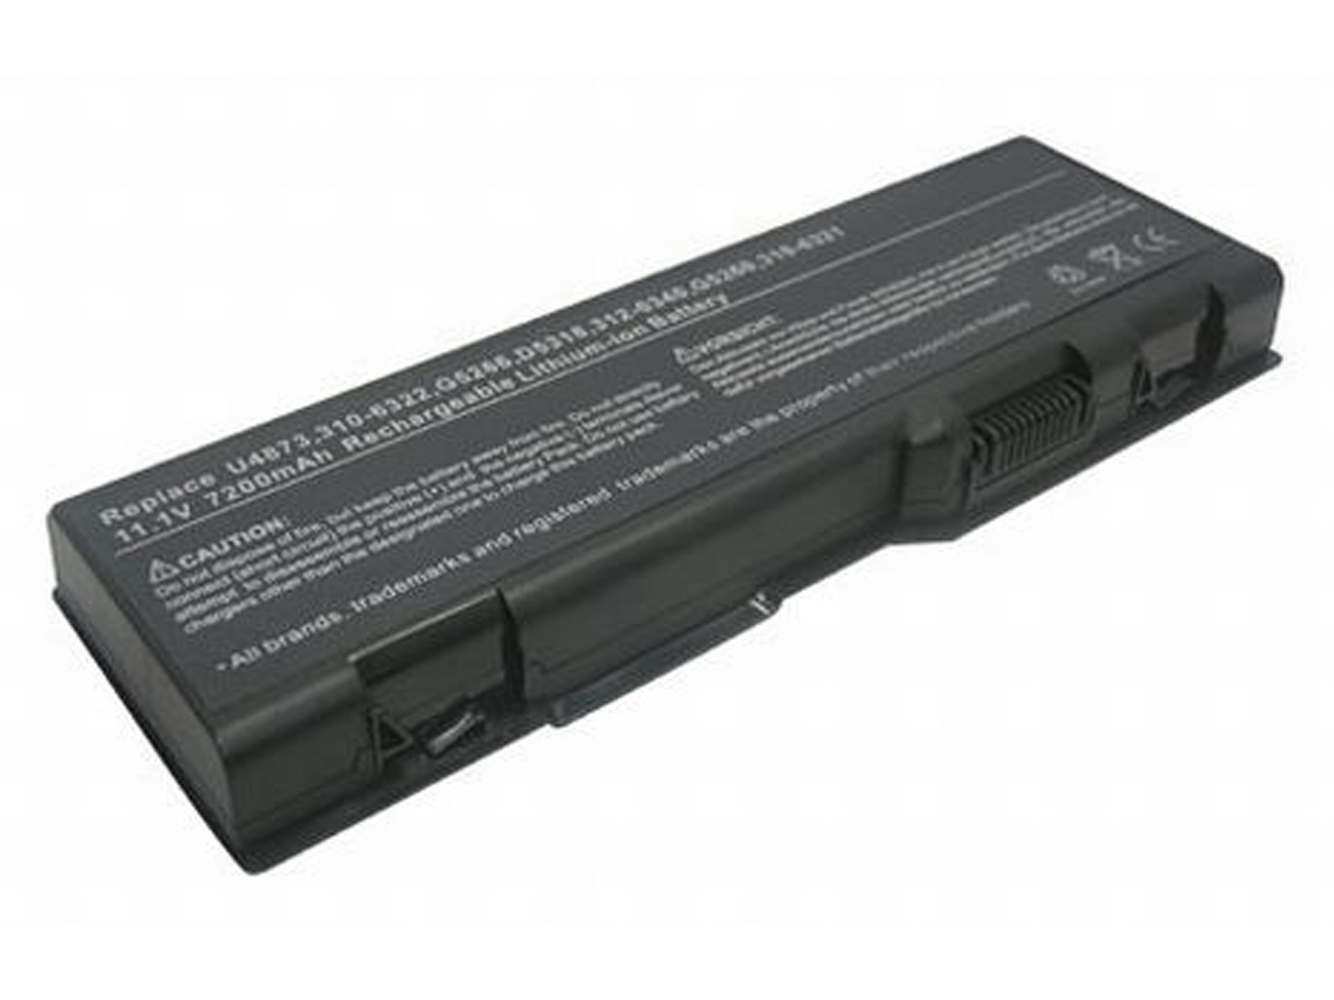 310-6321, 310-6322 replacement Laptop Battery for Dell Inspiron 6000, Inspiron 9200, 9 cells, 7800mAh, 11.10V